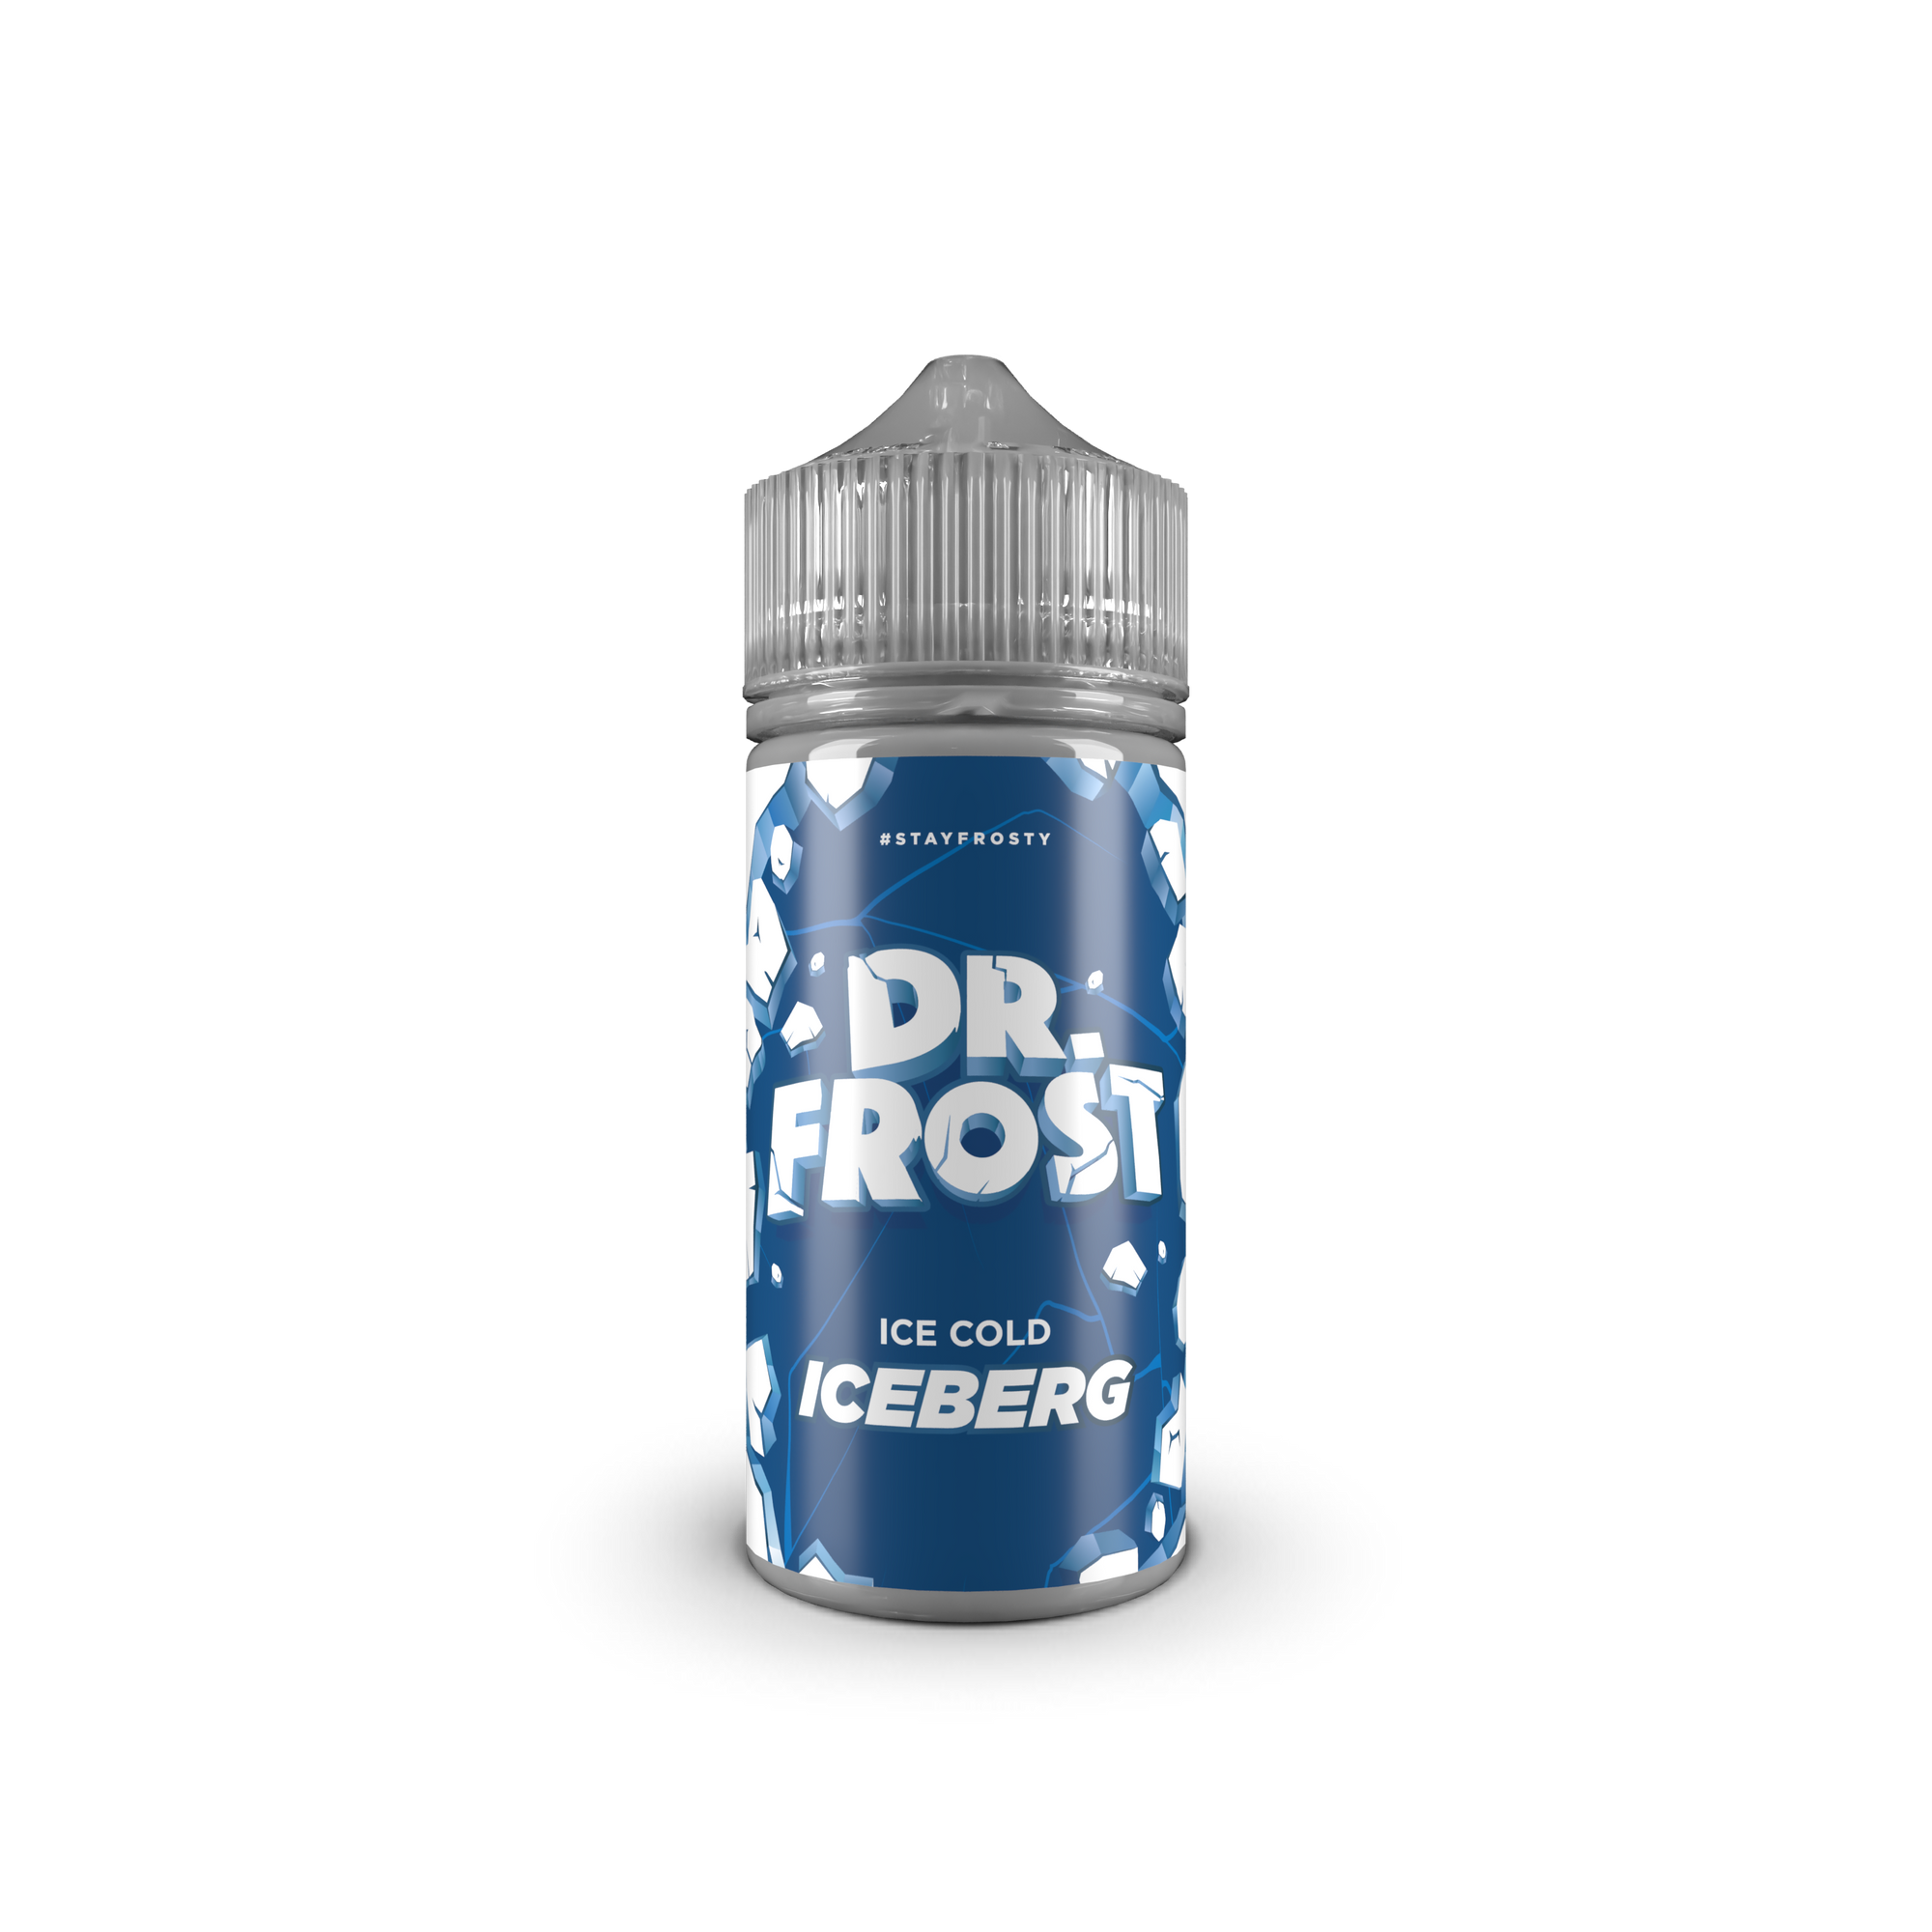 Buy IceBerg By Dr Frost - Wick and Wire Co Melbourne Vape Shop, Victoria Australia